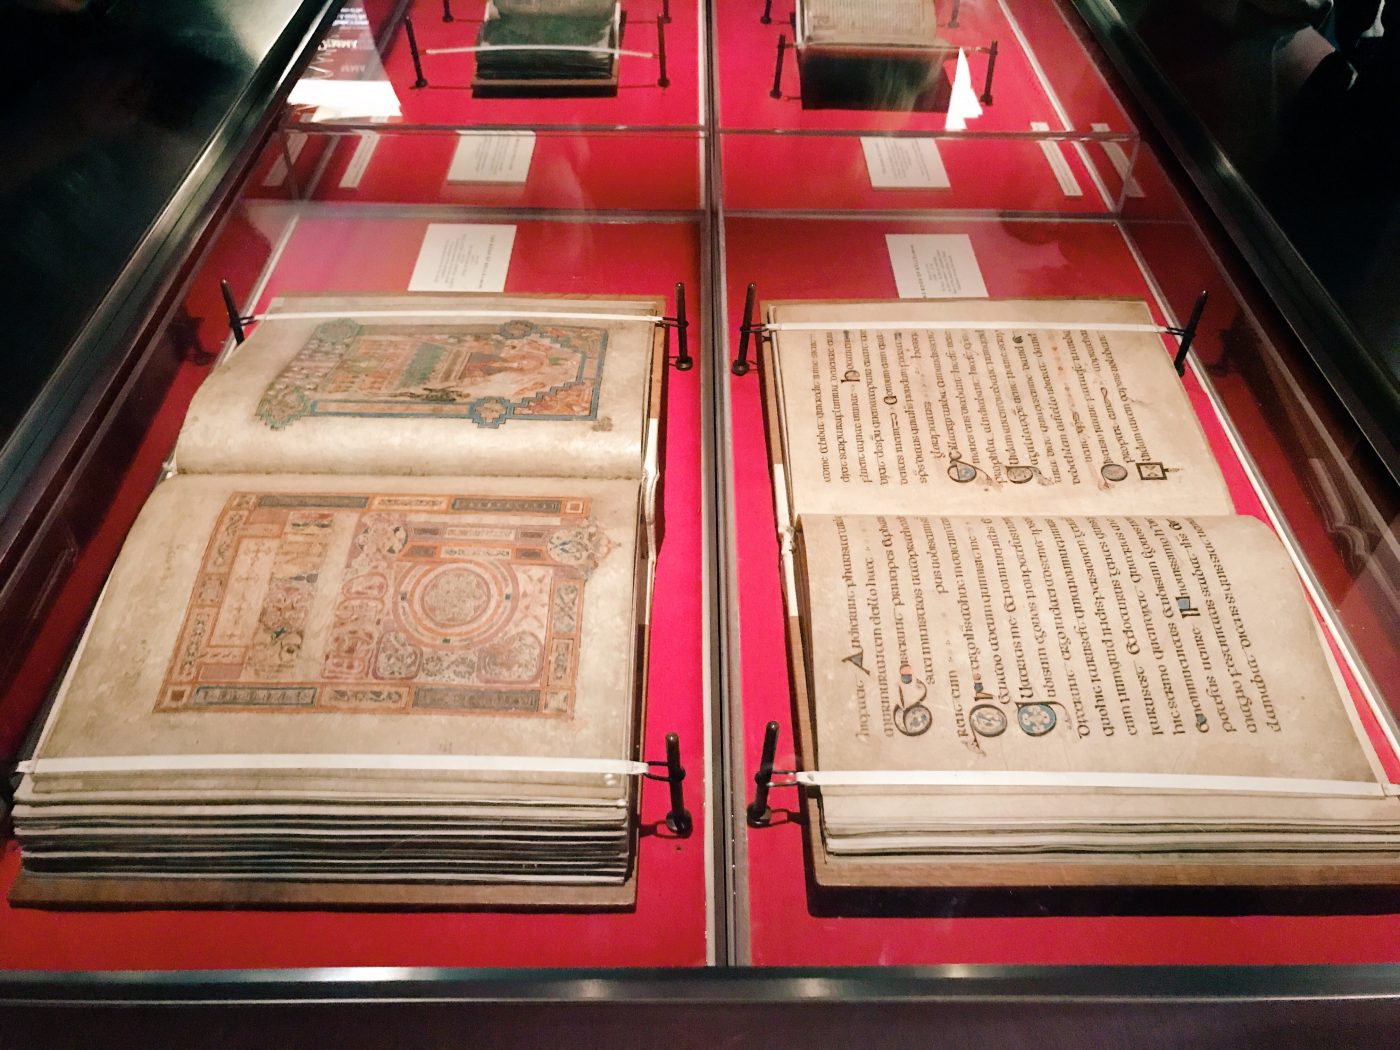 the Book of kells